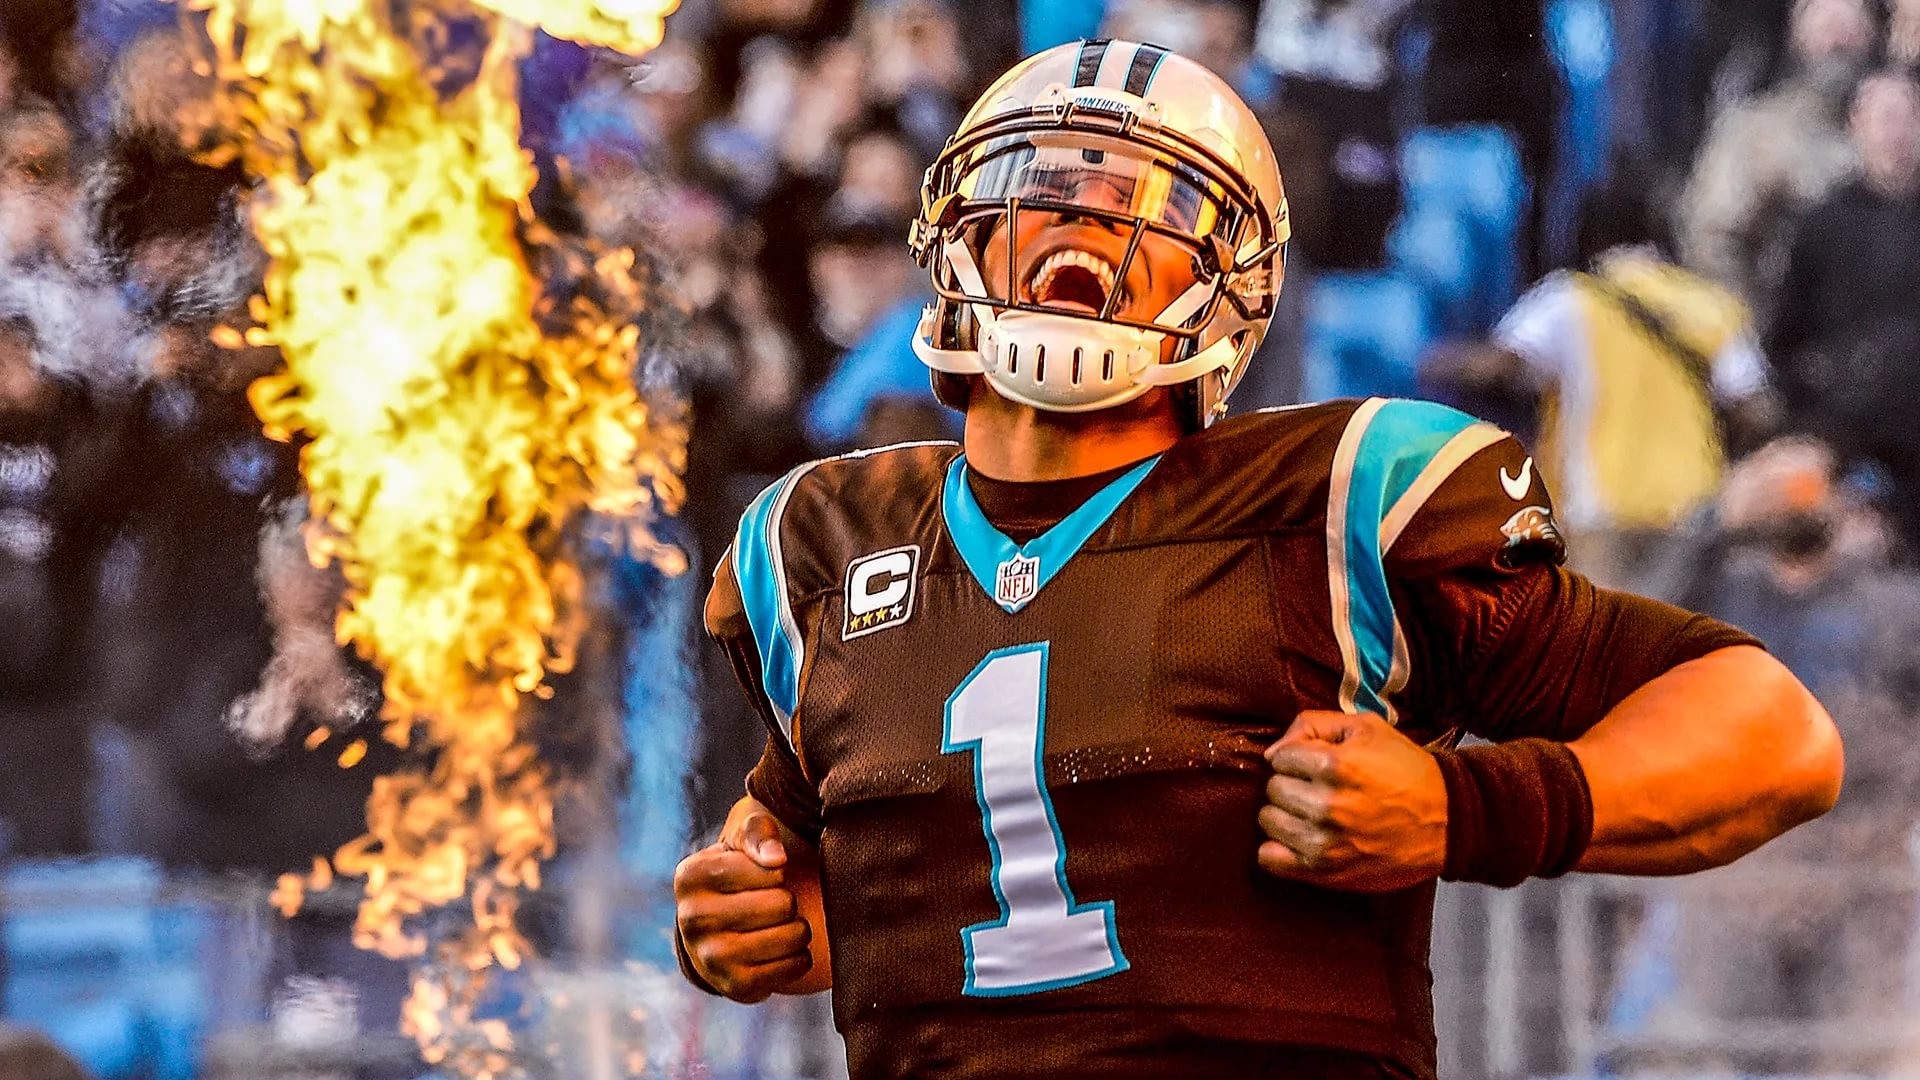 1920x1080 Cam newton hd wallpapers free